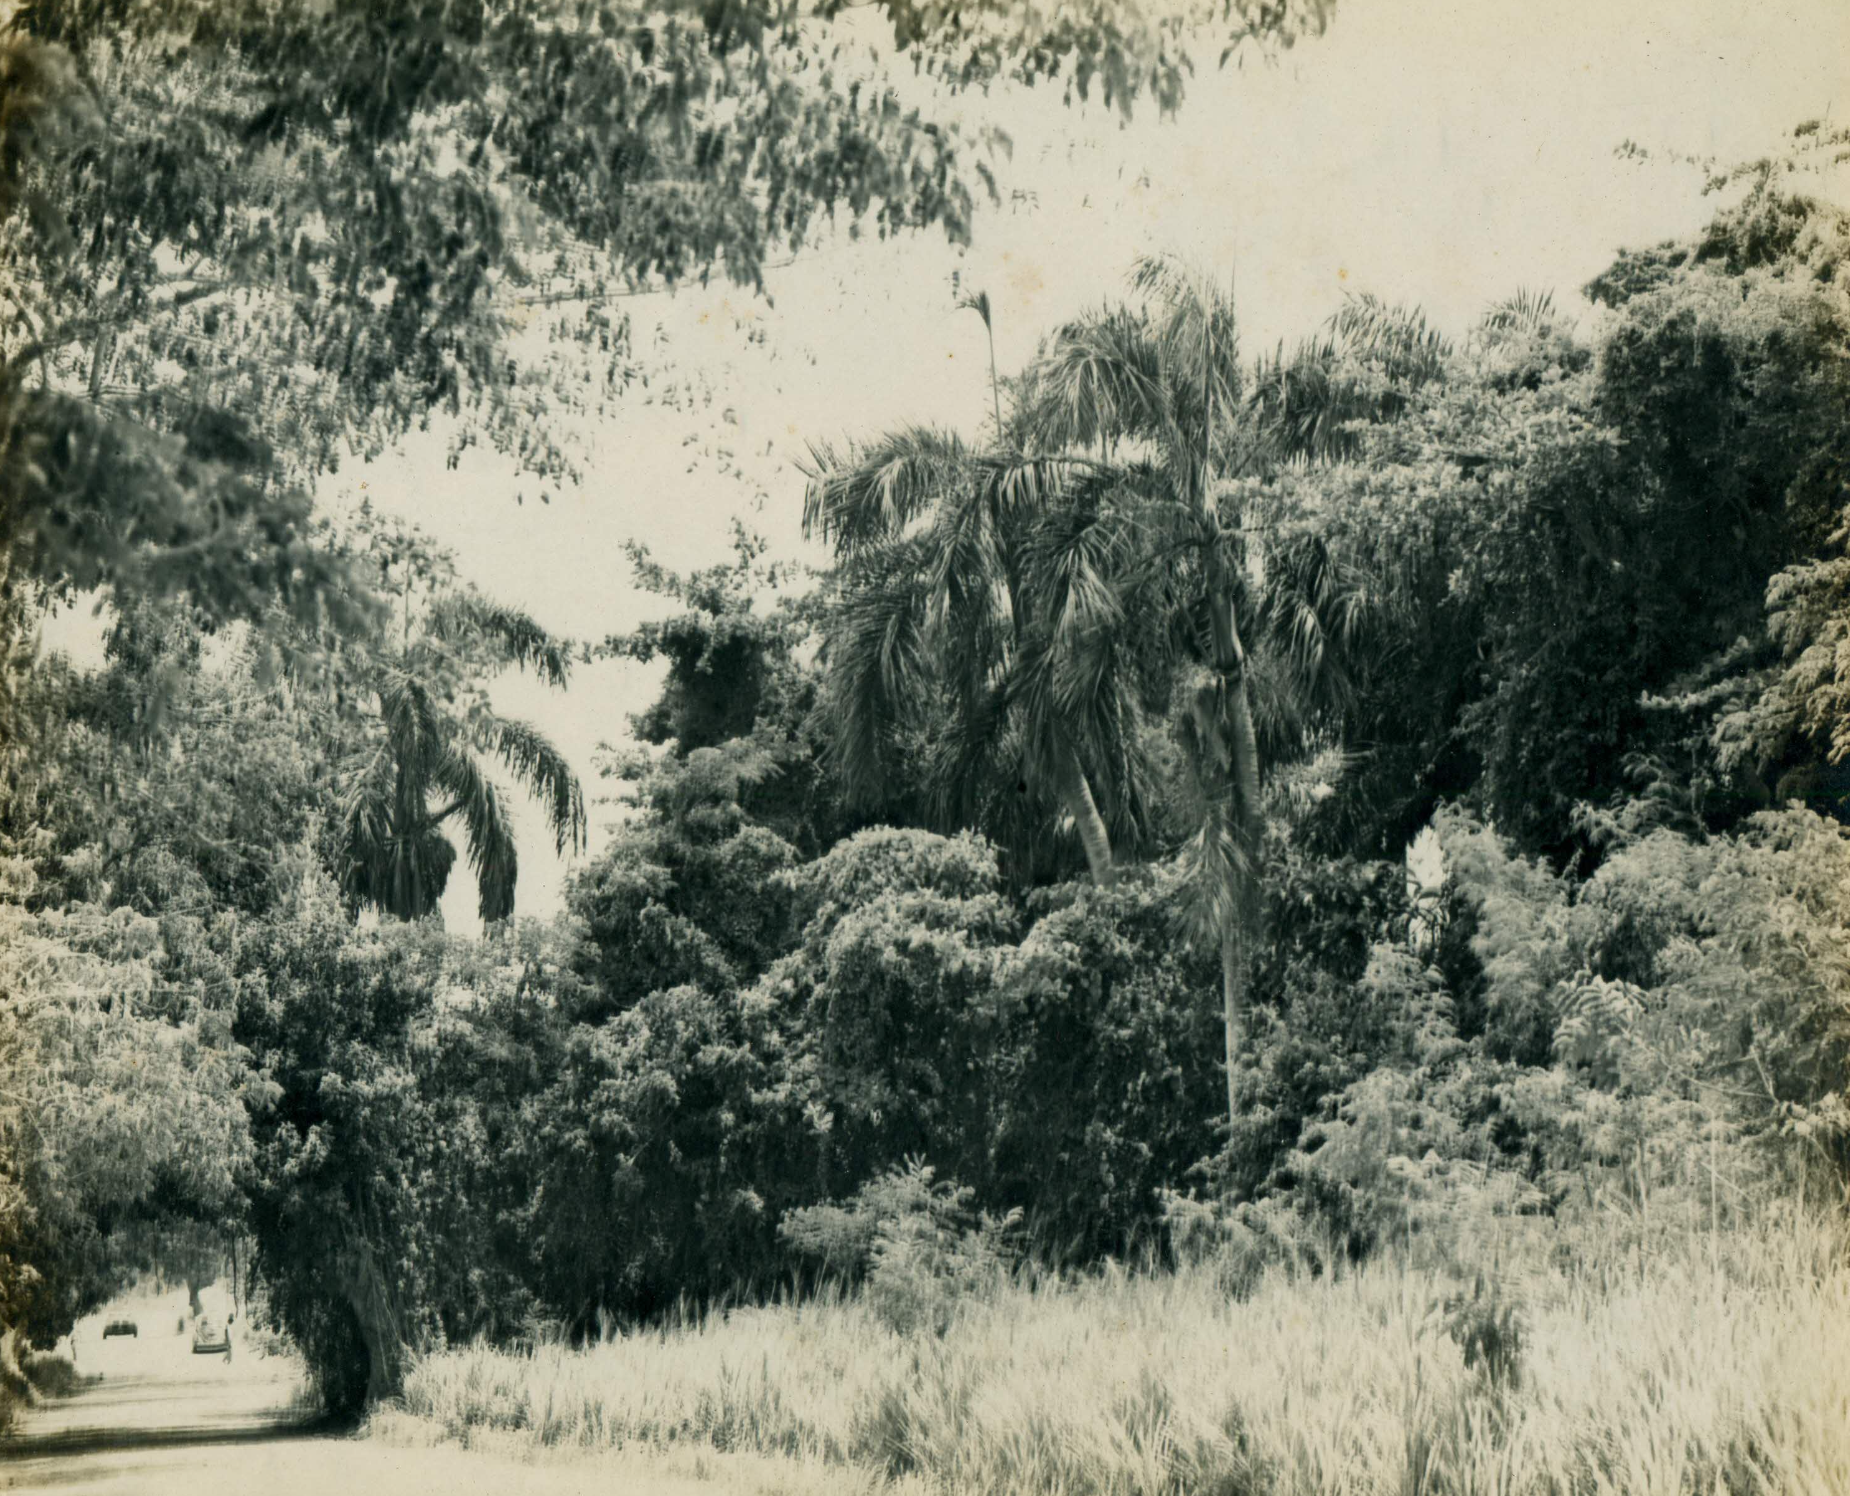 The road led leading to Holy Cross Church. Nature took over the cane fields fast once Bethlehem Sugar Factory closed its doors for good in 1966. (Image courtesy Olasee Davis)